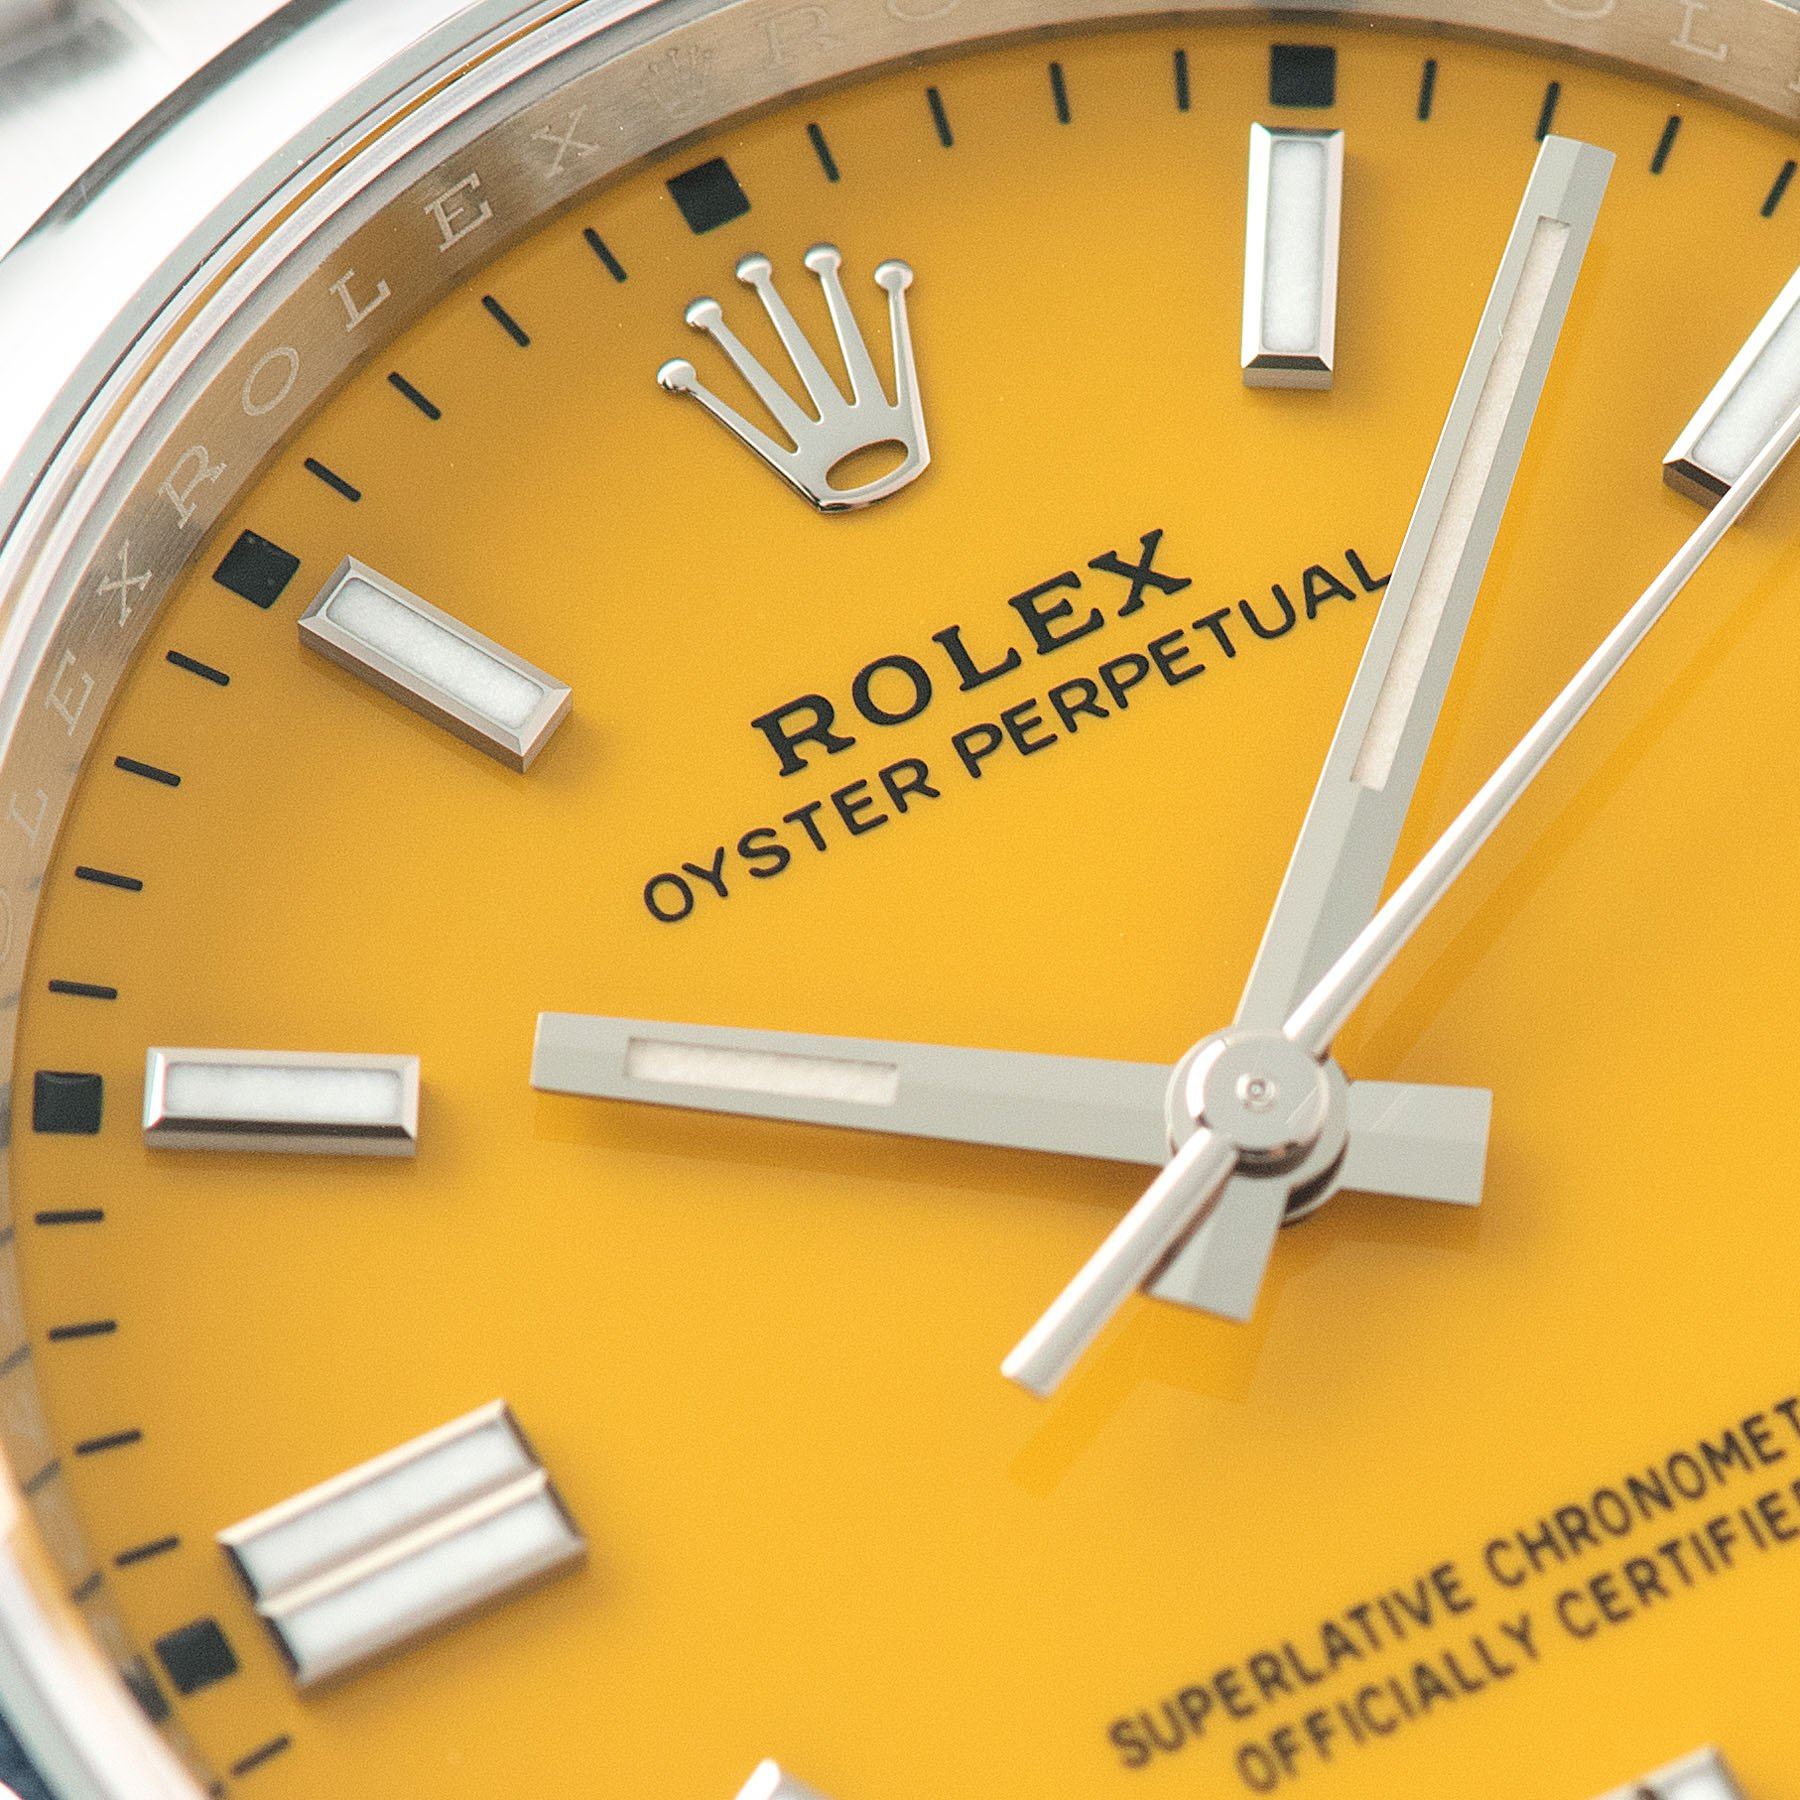 2020 Rolex Oyster Perpetual 41 Stella-Inspired 124300 - Hands-On